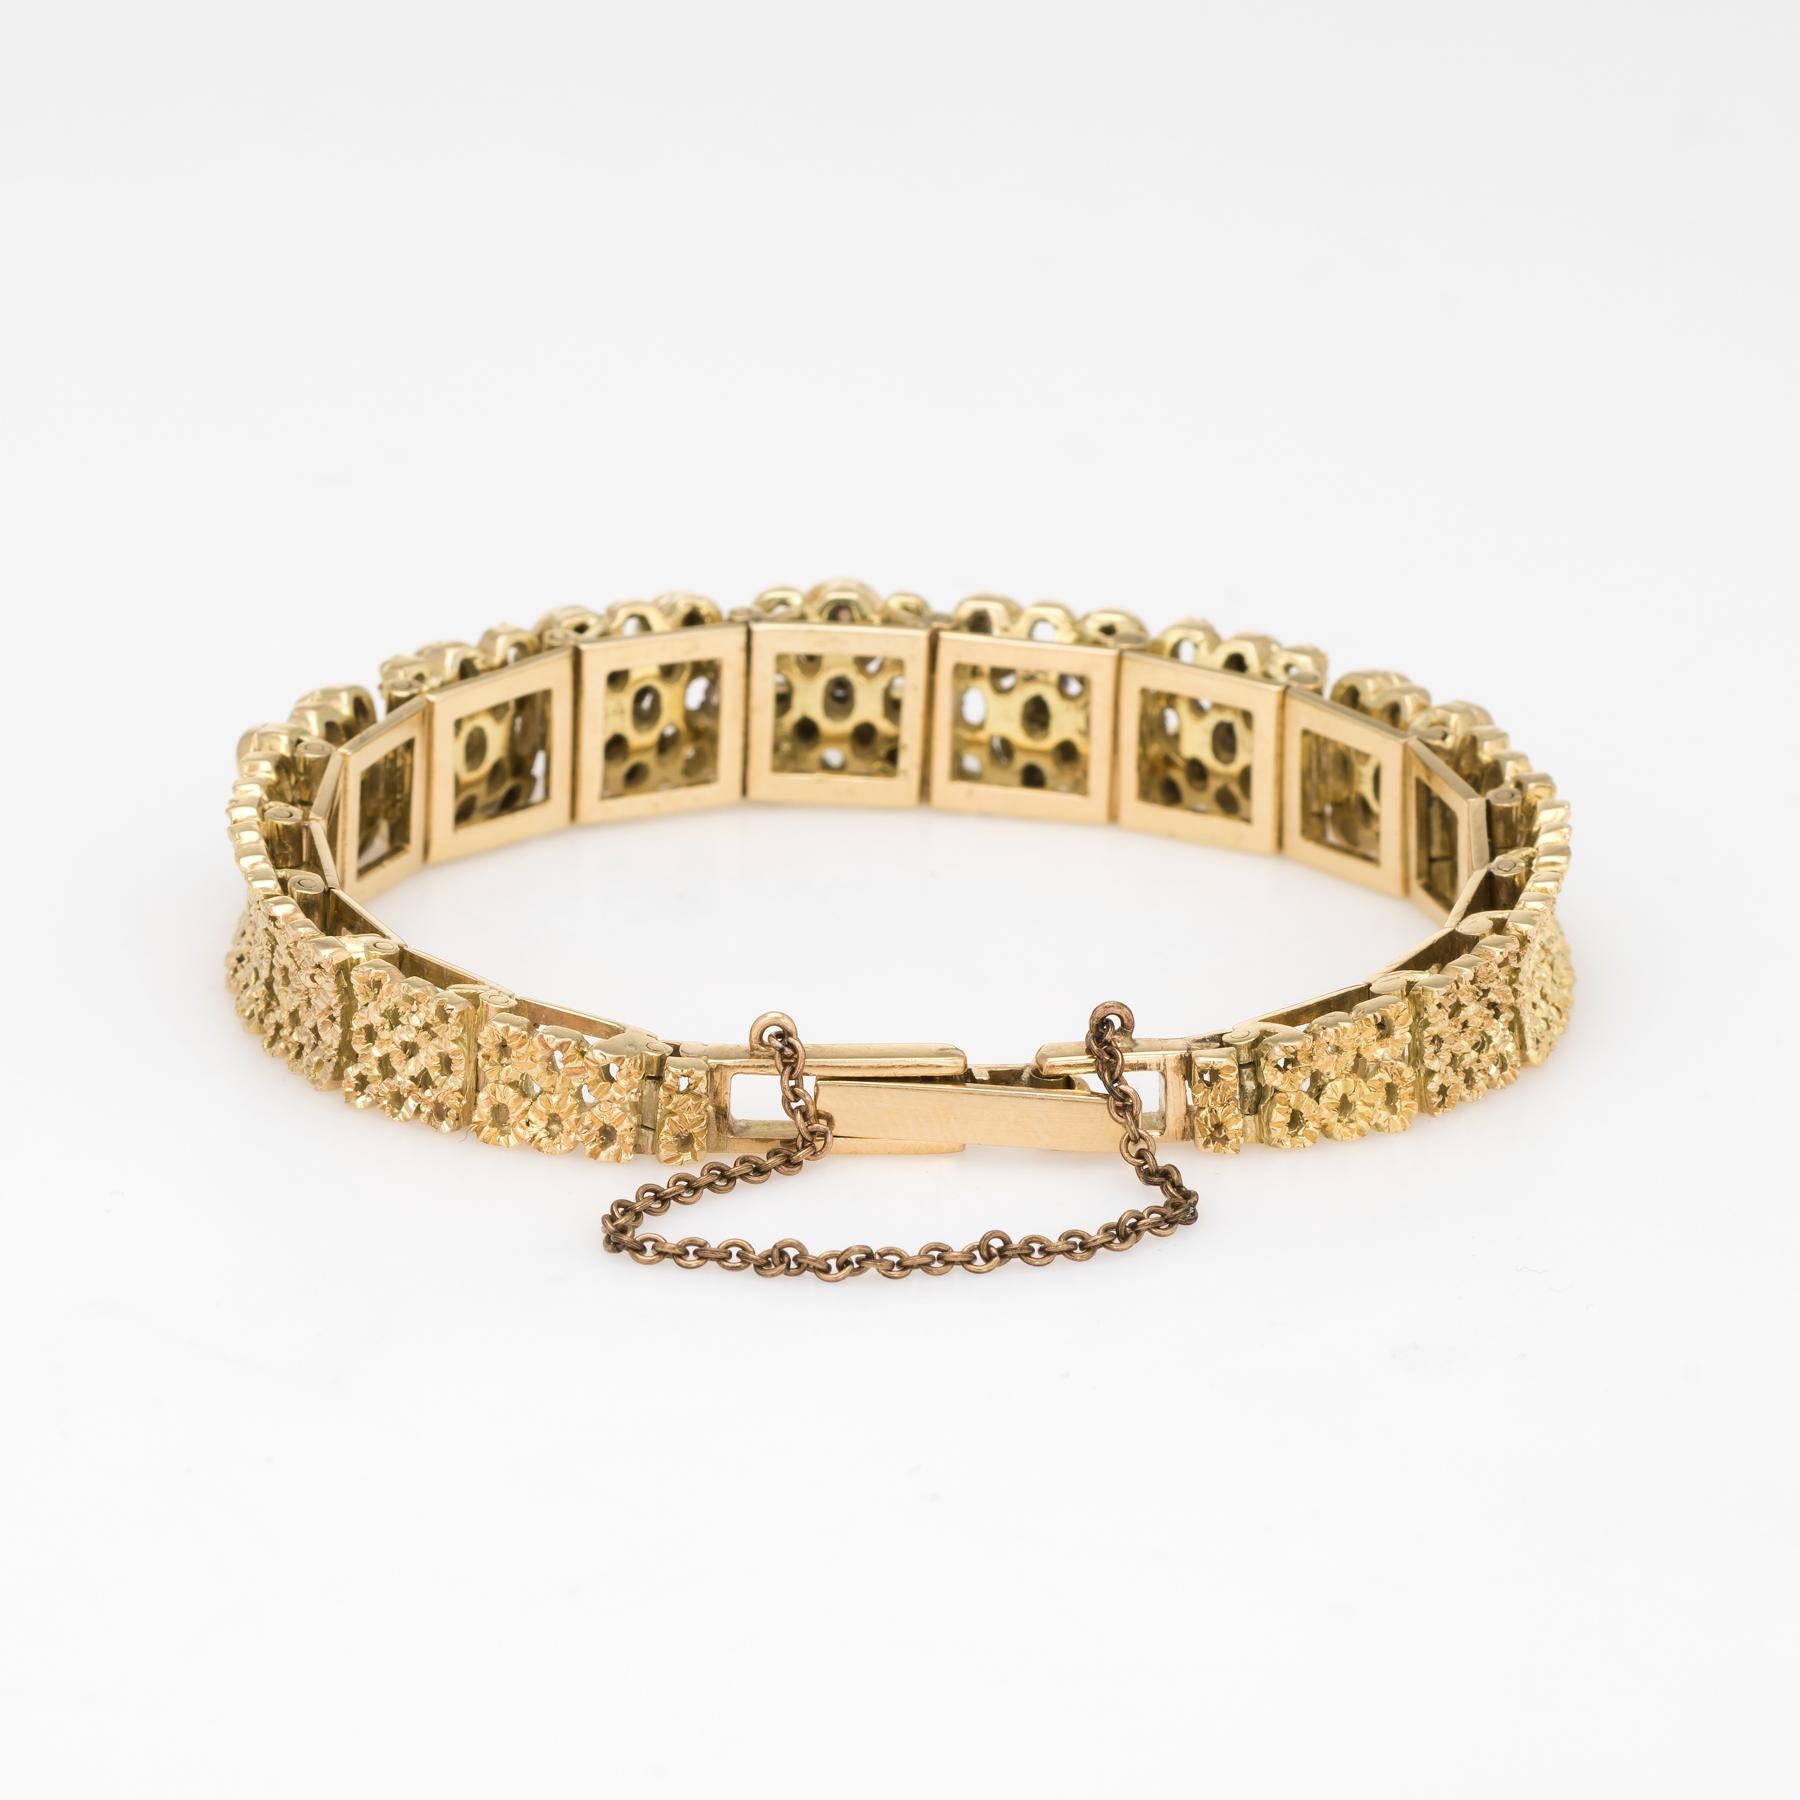 Stylish and finely detailed vintage opal bracelet (circa 1970s), crafted in 14 karat yellow gold. 

21 natural opals measure (average) 3mm (estimated at 0.10 carats each - 2.10 carats total estimated weight), accented with 7 estimated 0.01 carat